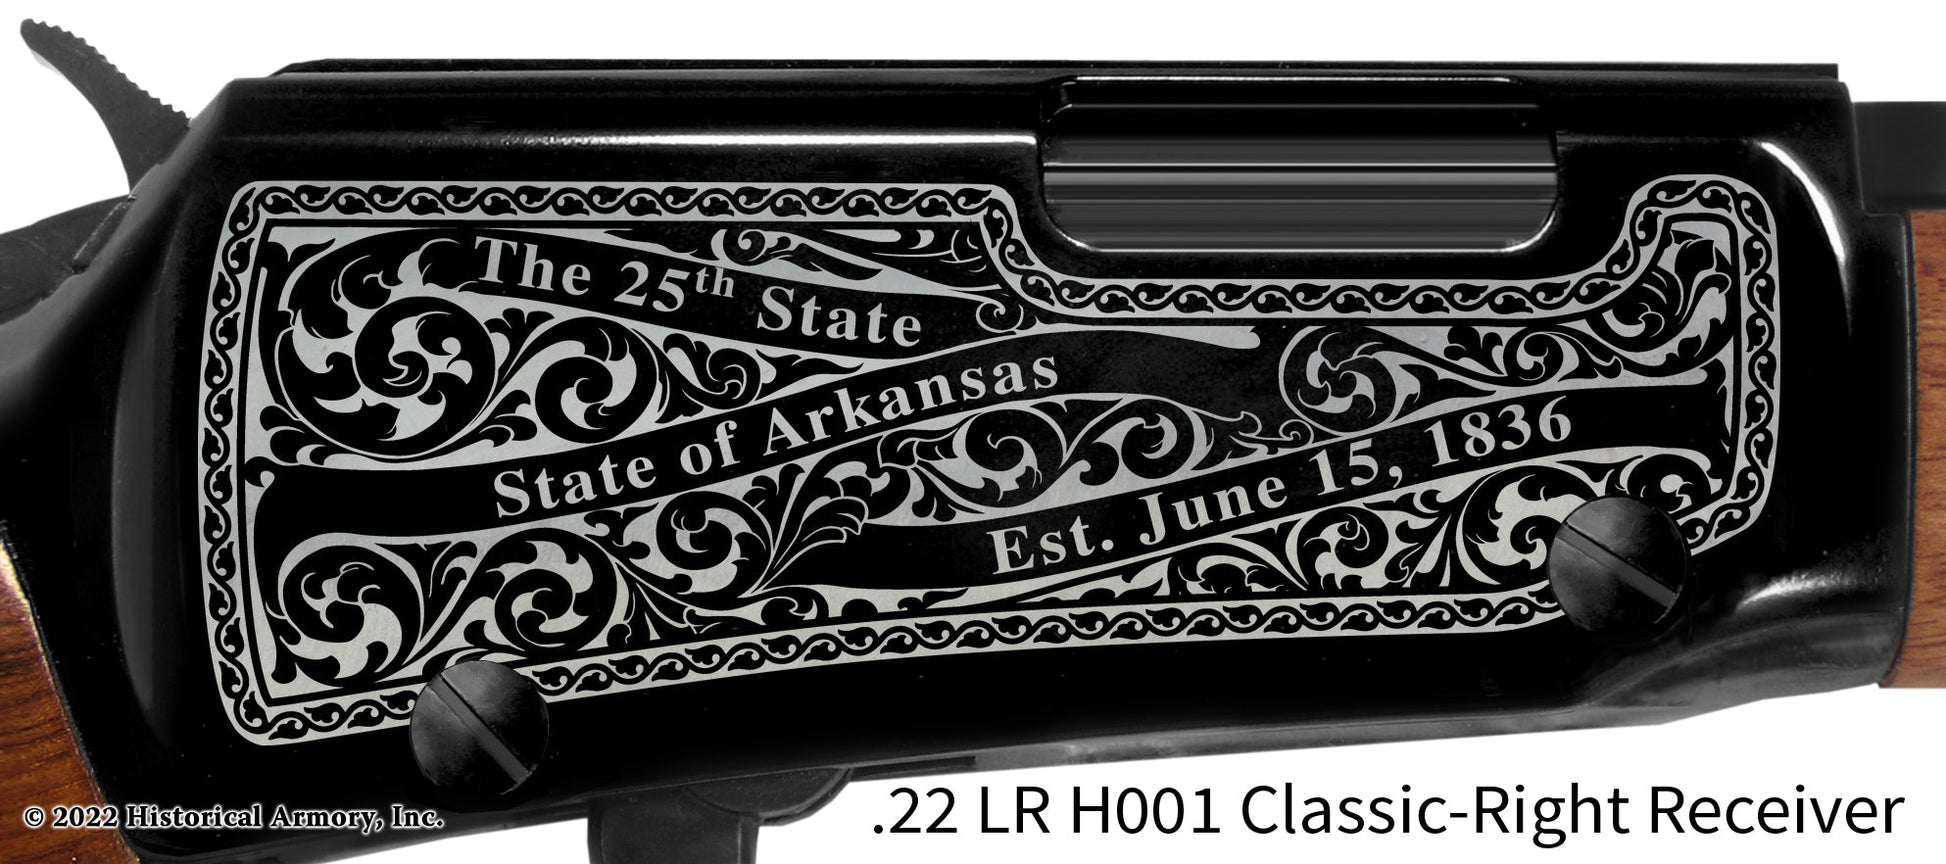 Franklin County Arkansas Engraved Henry H001 Rifle